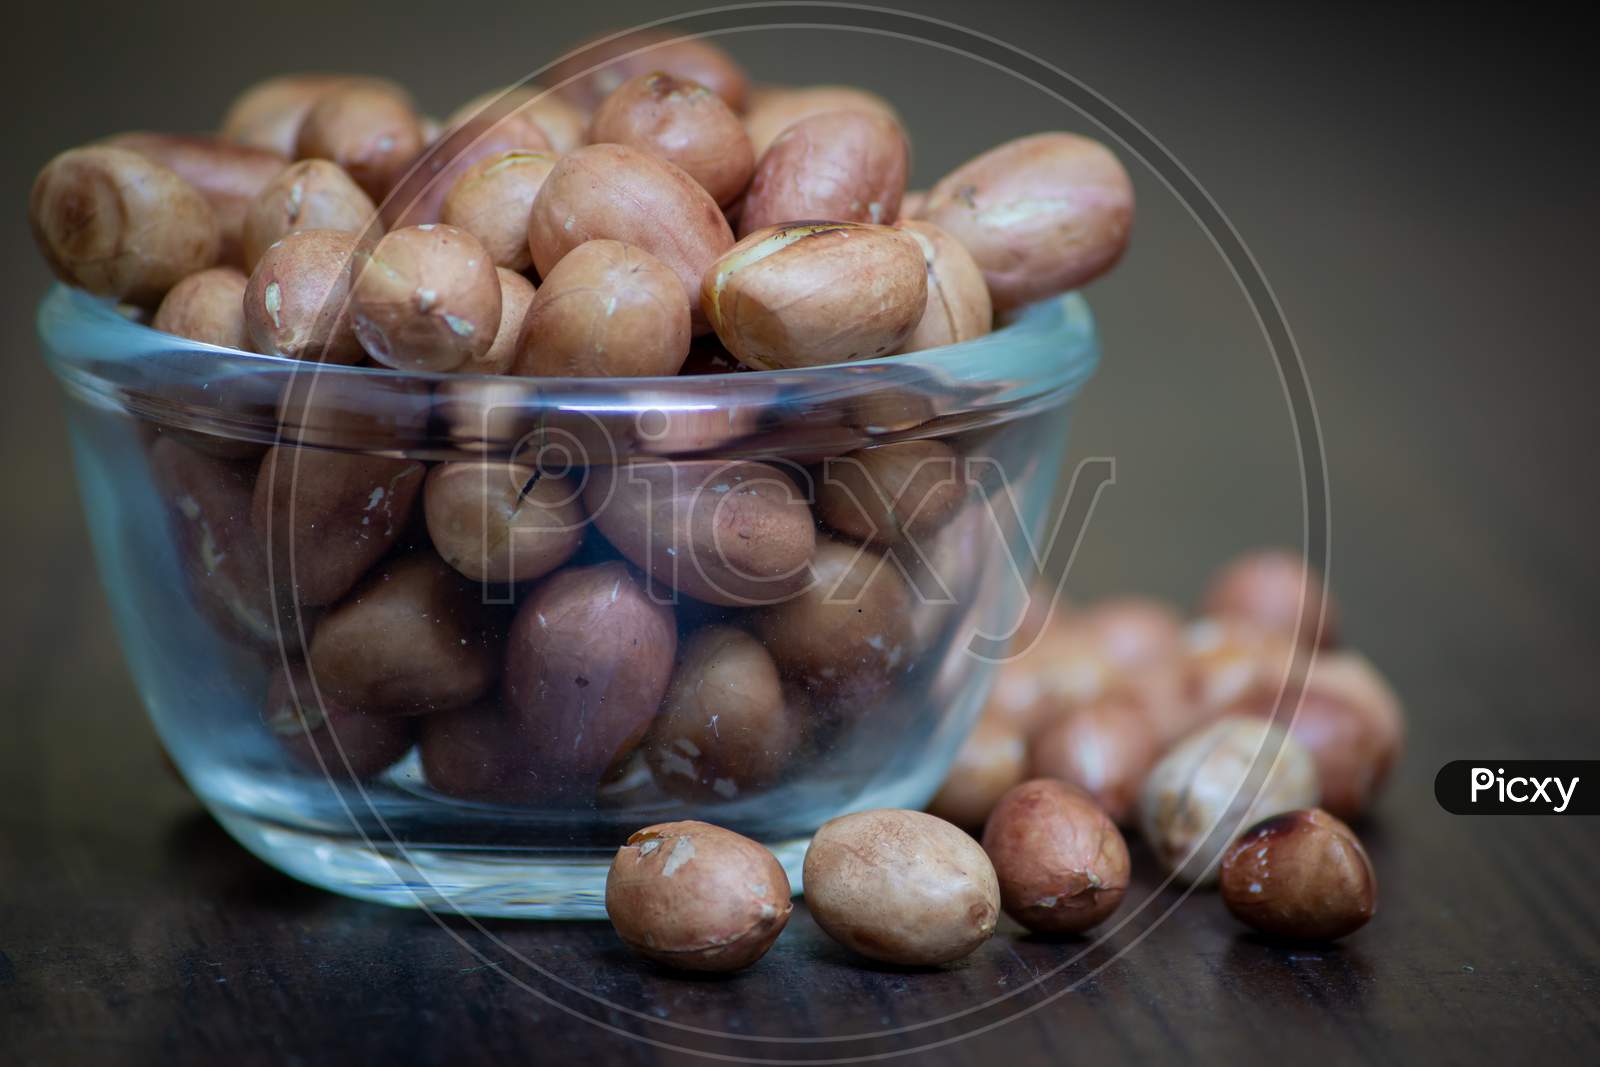 Roasted Groundnuts In A Bowl. Healthy Snack Rich In Protein.